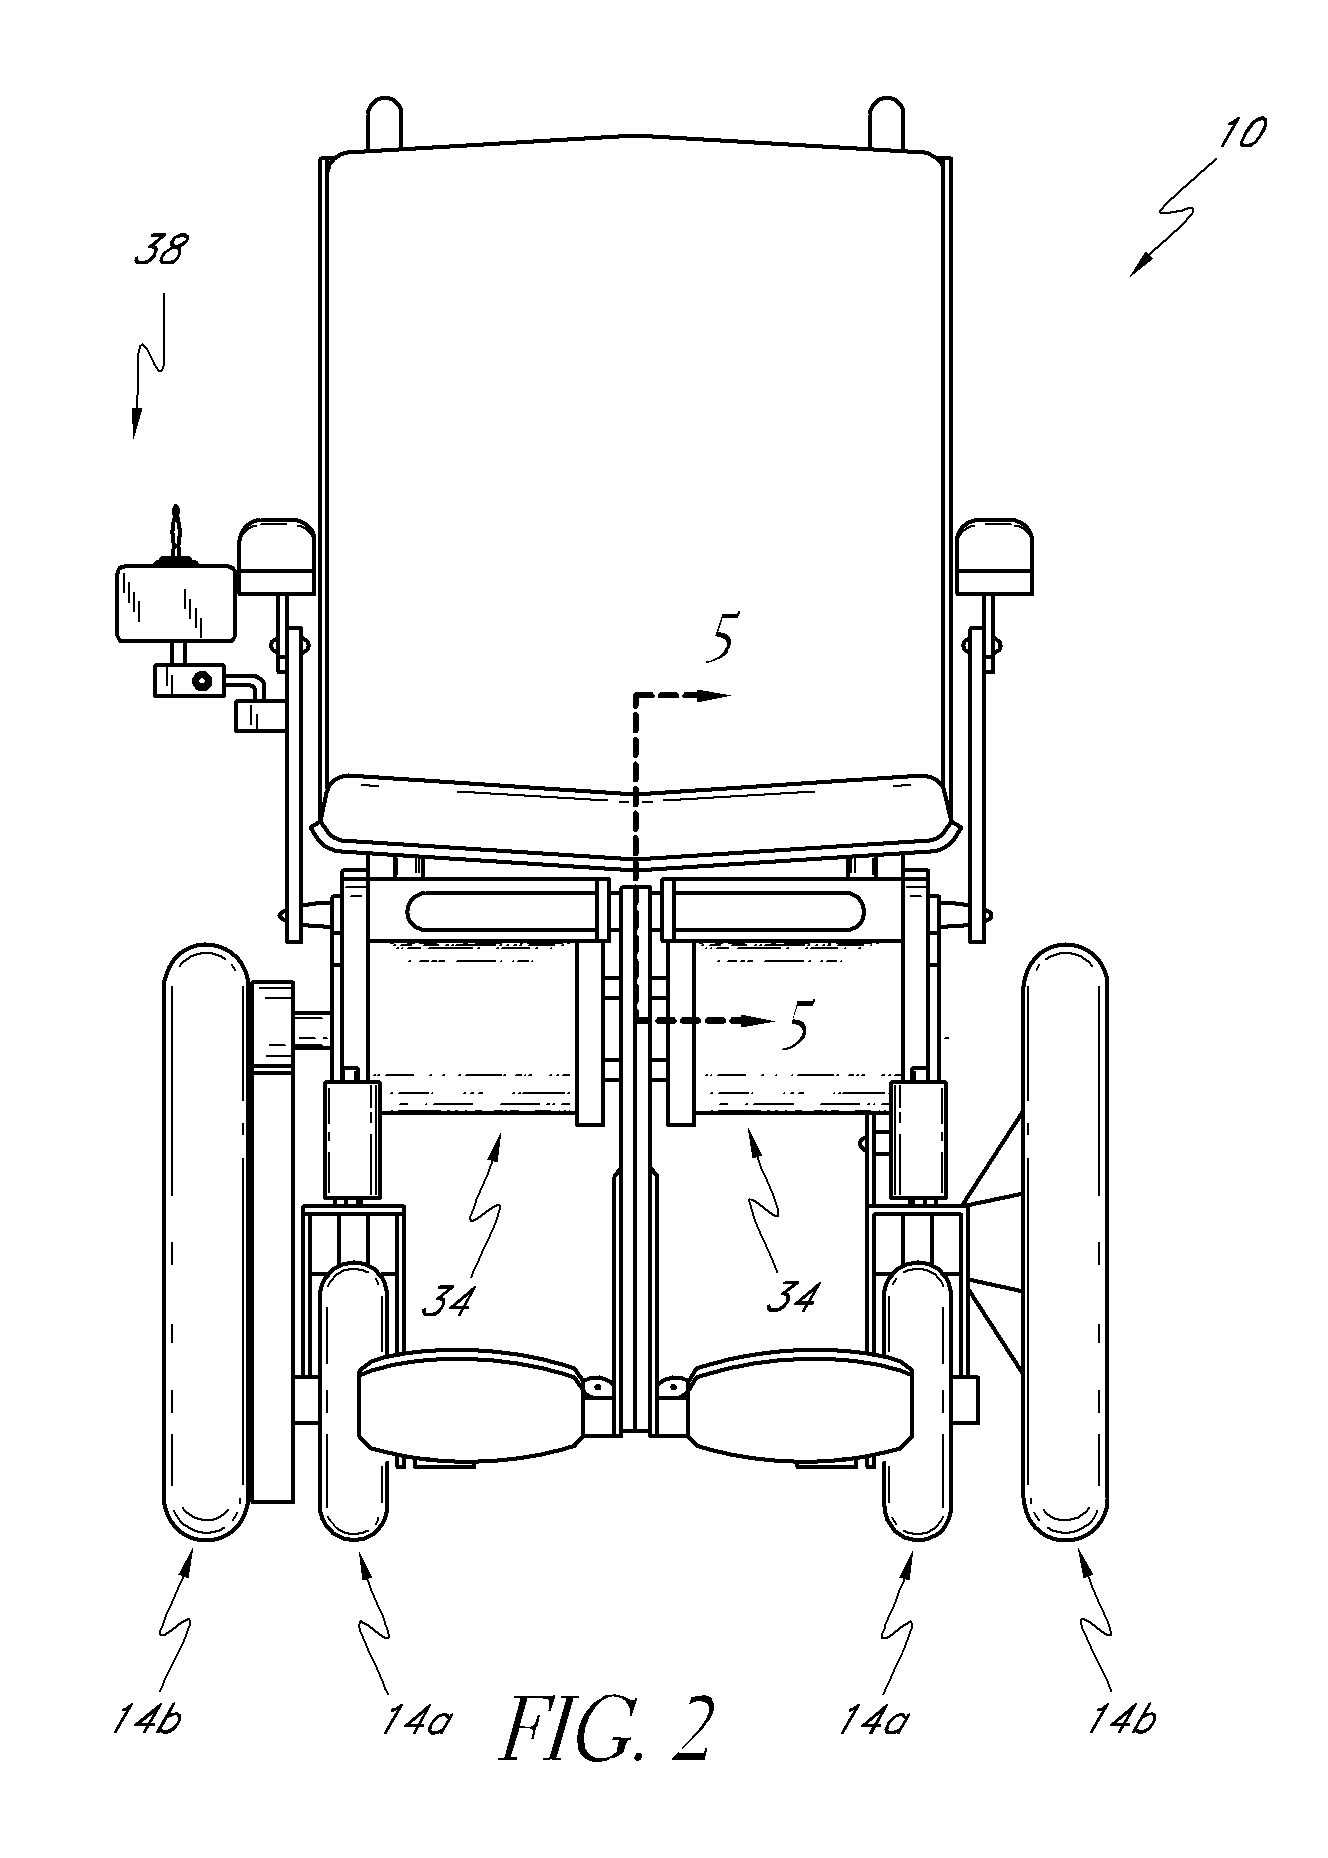 Ventilation system for seat